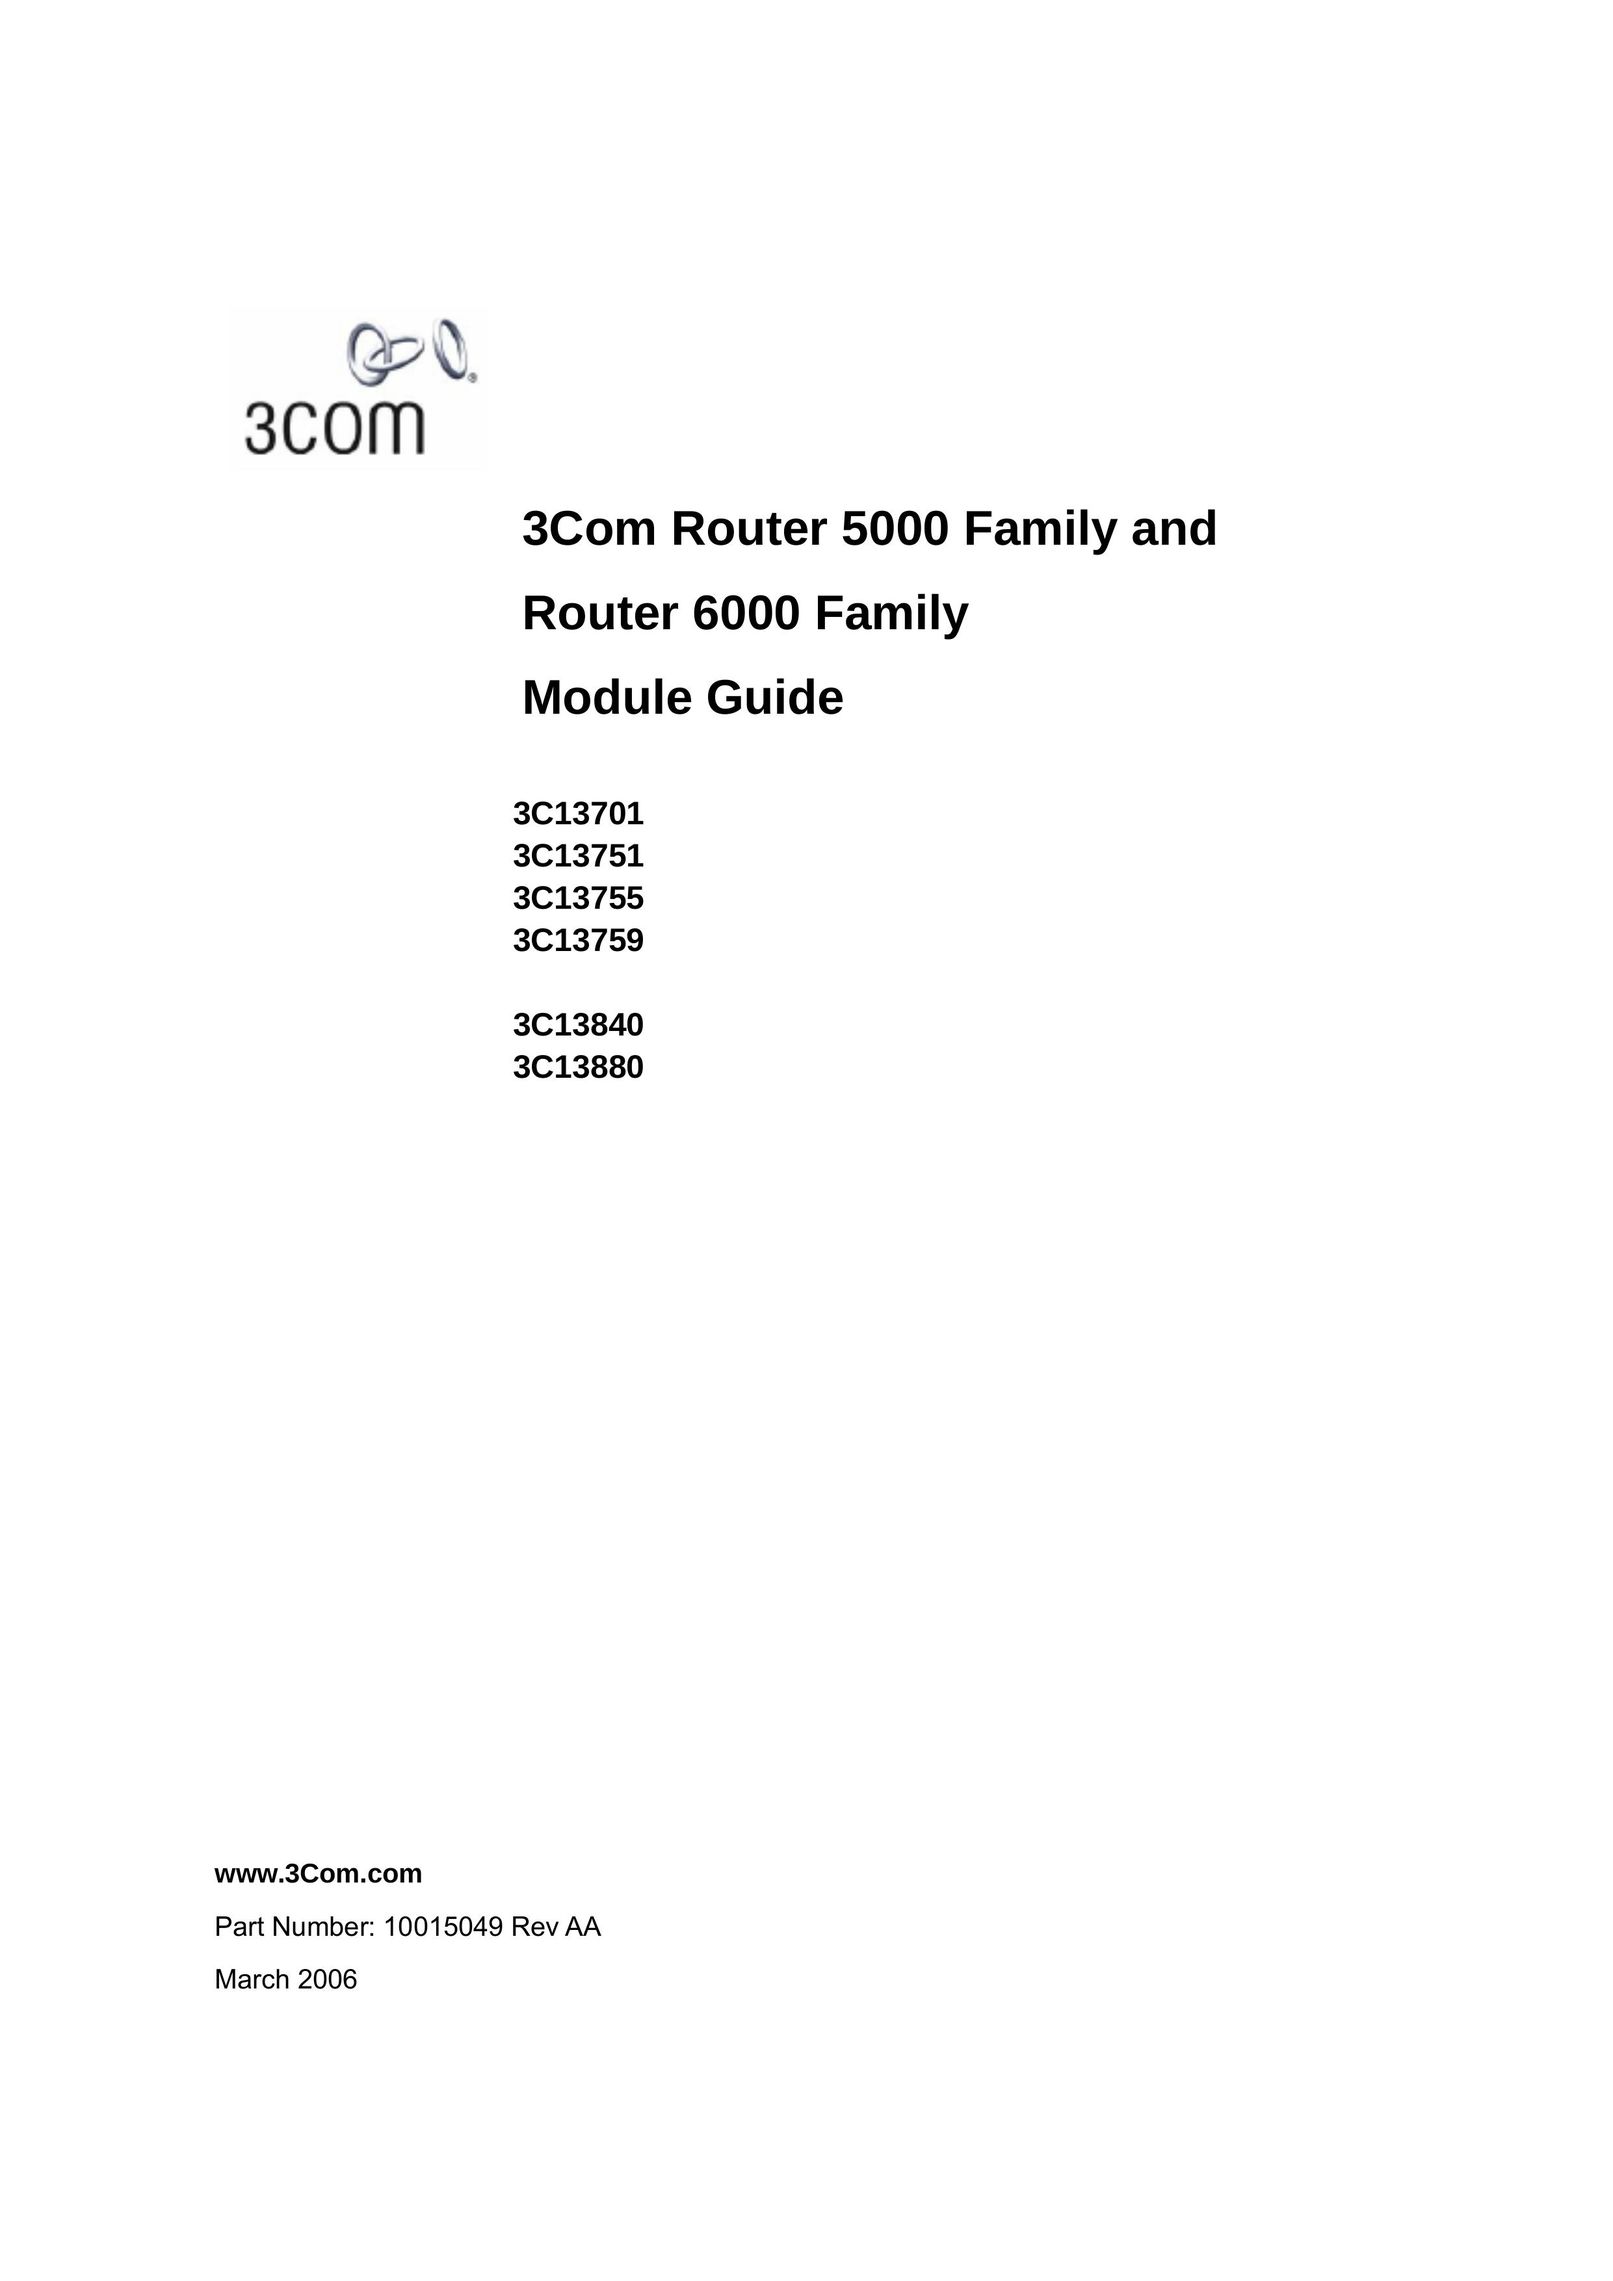 3Com 3C13751 Network Router User Manual